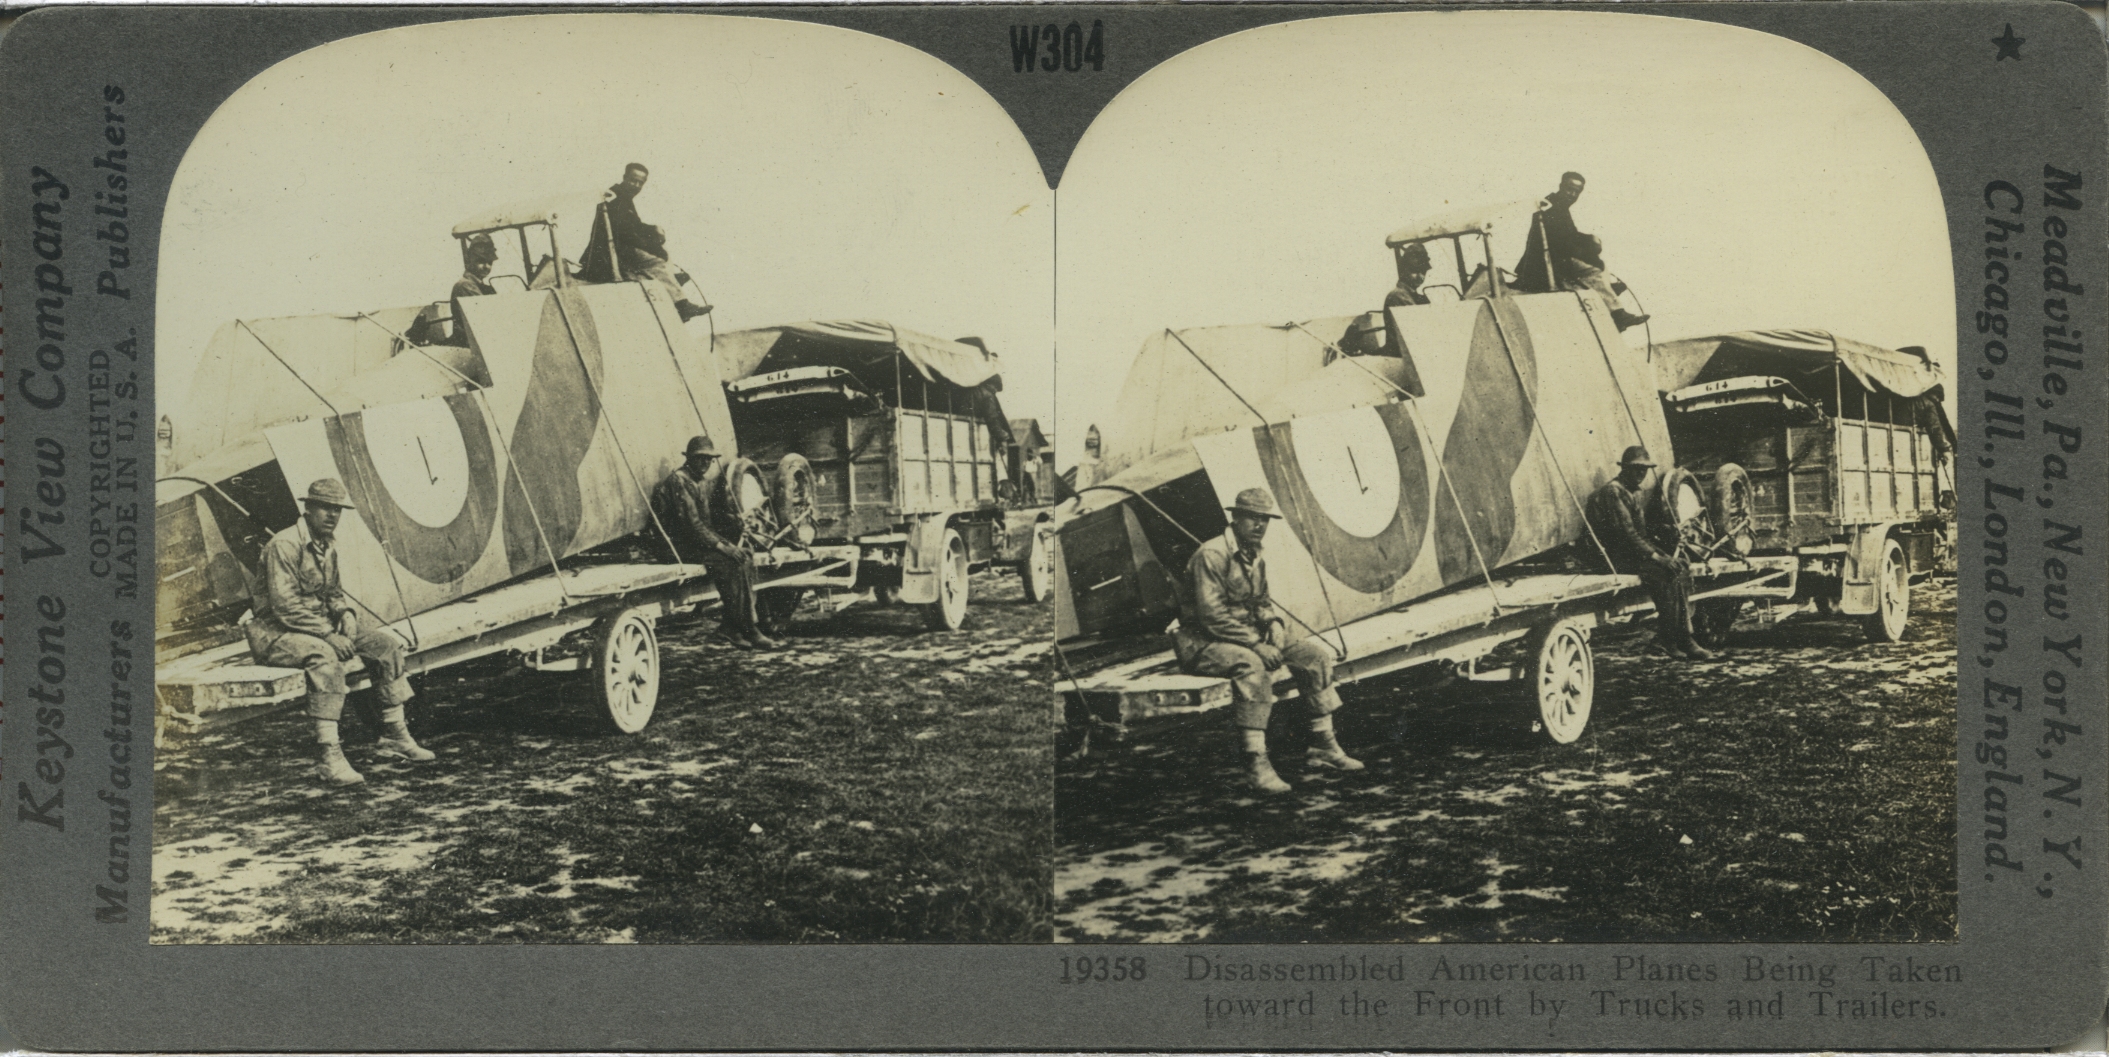 Disassembled American Planes Being Taken toward the Front by Trucks and Trailers